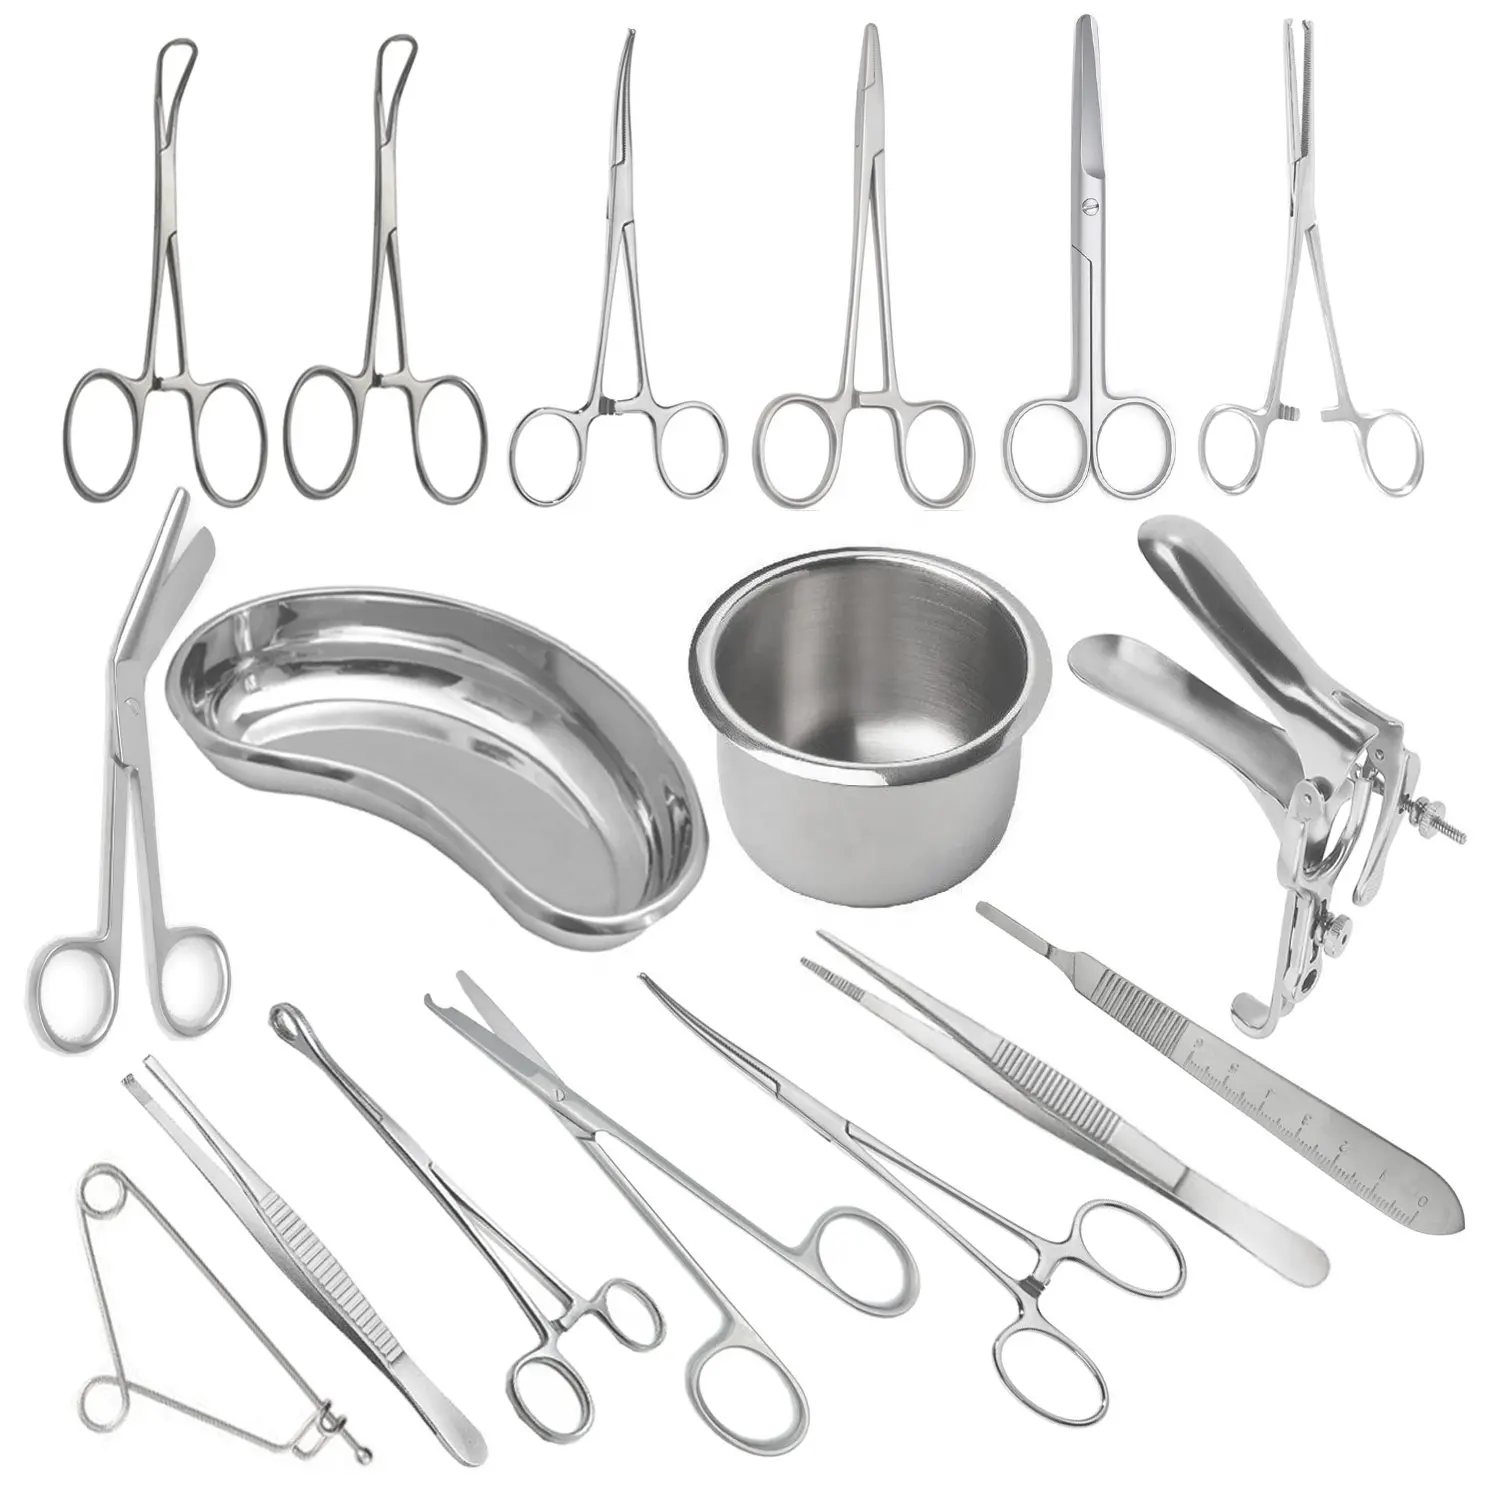 Gyne Episiotomy Set of 20Pcs Surgery Basic Delivery Mini Gynecology Normal Vaginal Delivery Labor Surgical Instruments